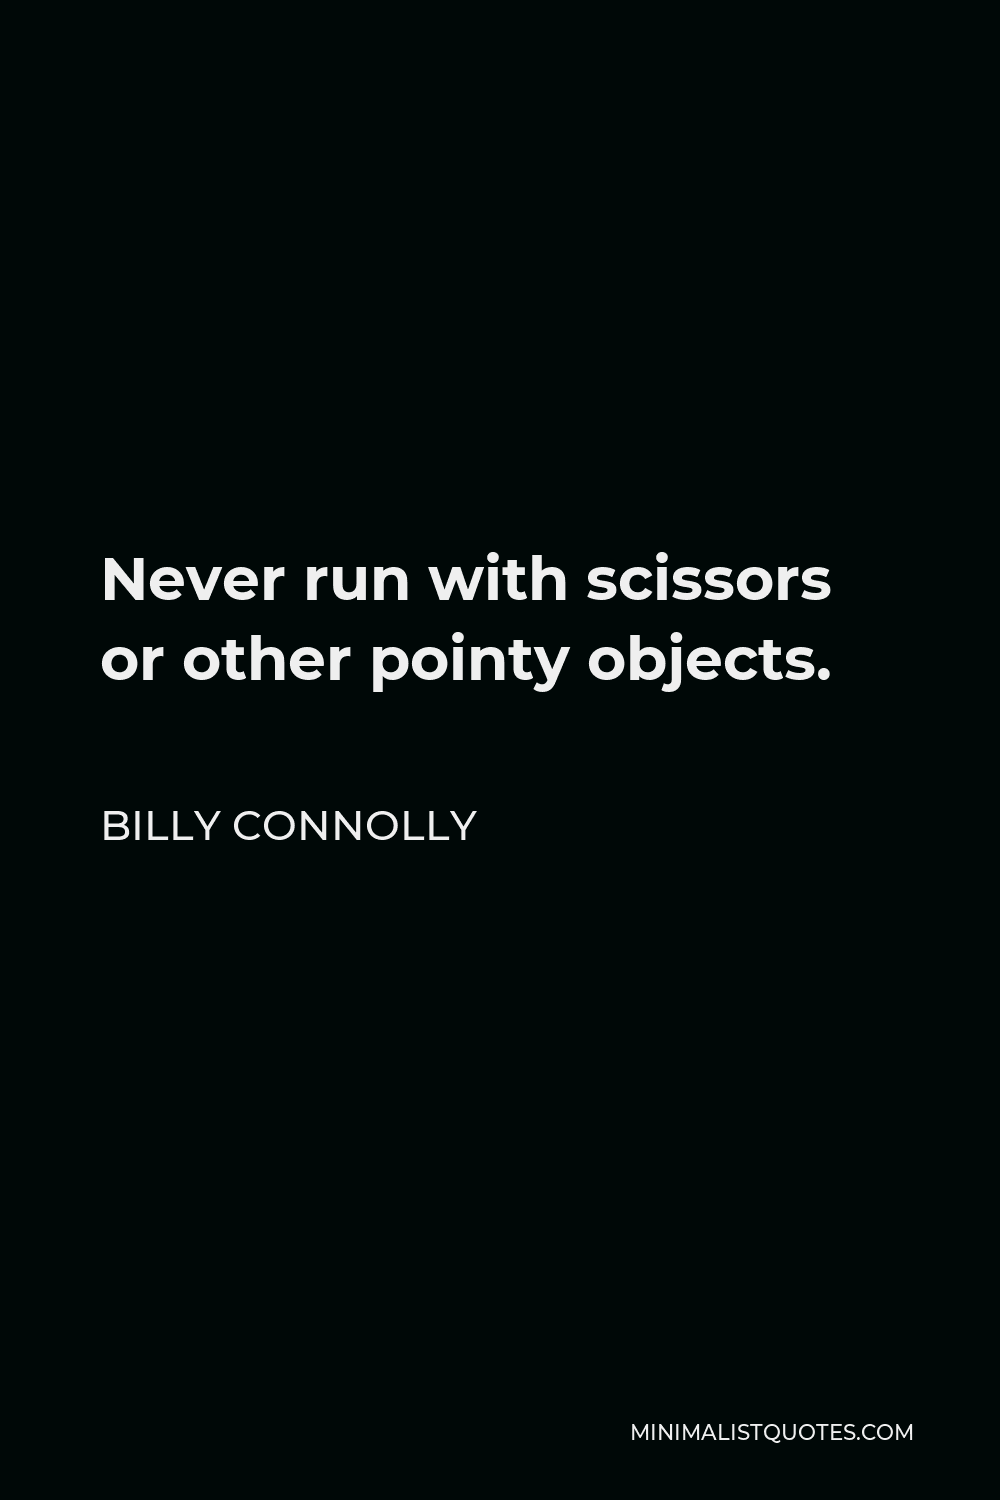 Billy Connolly Quote - Never run with scissors or other pointy objects.